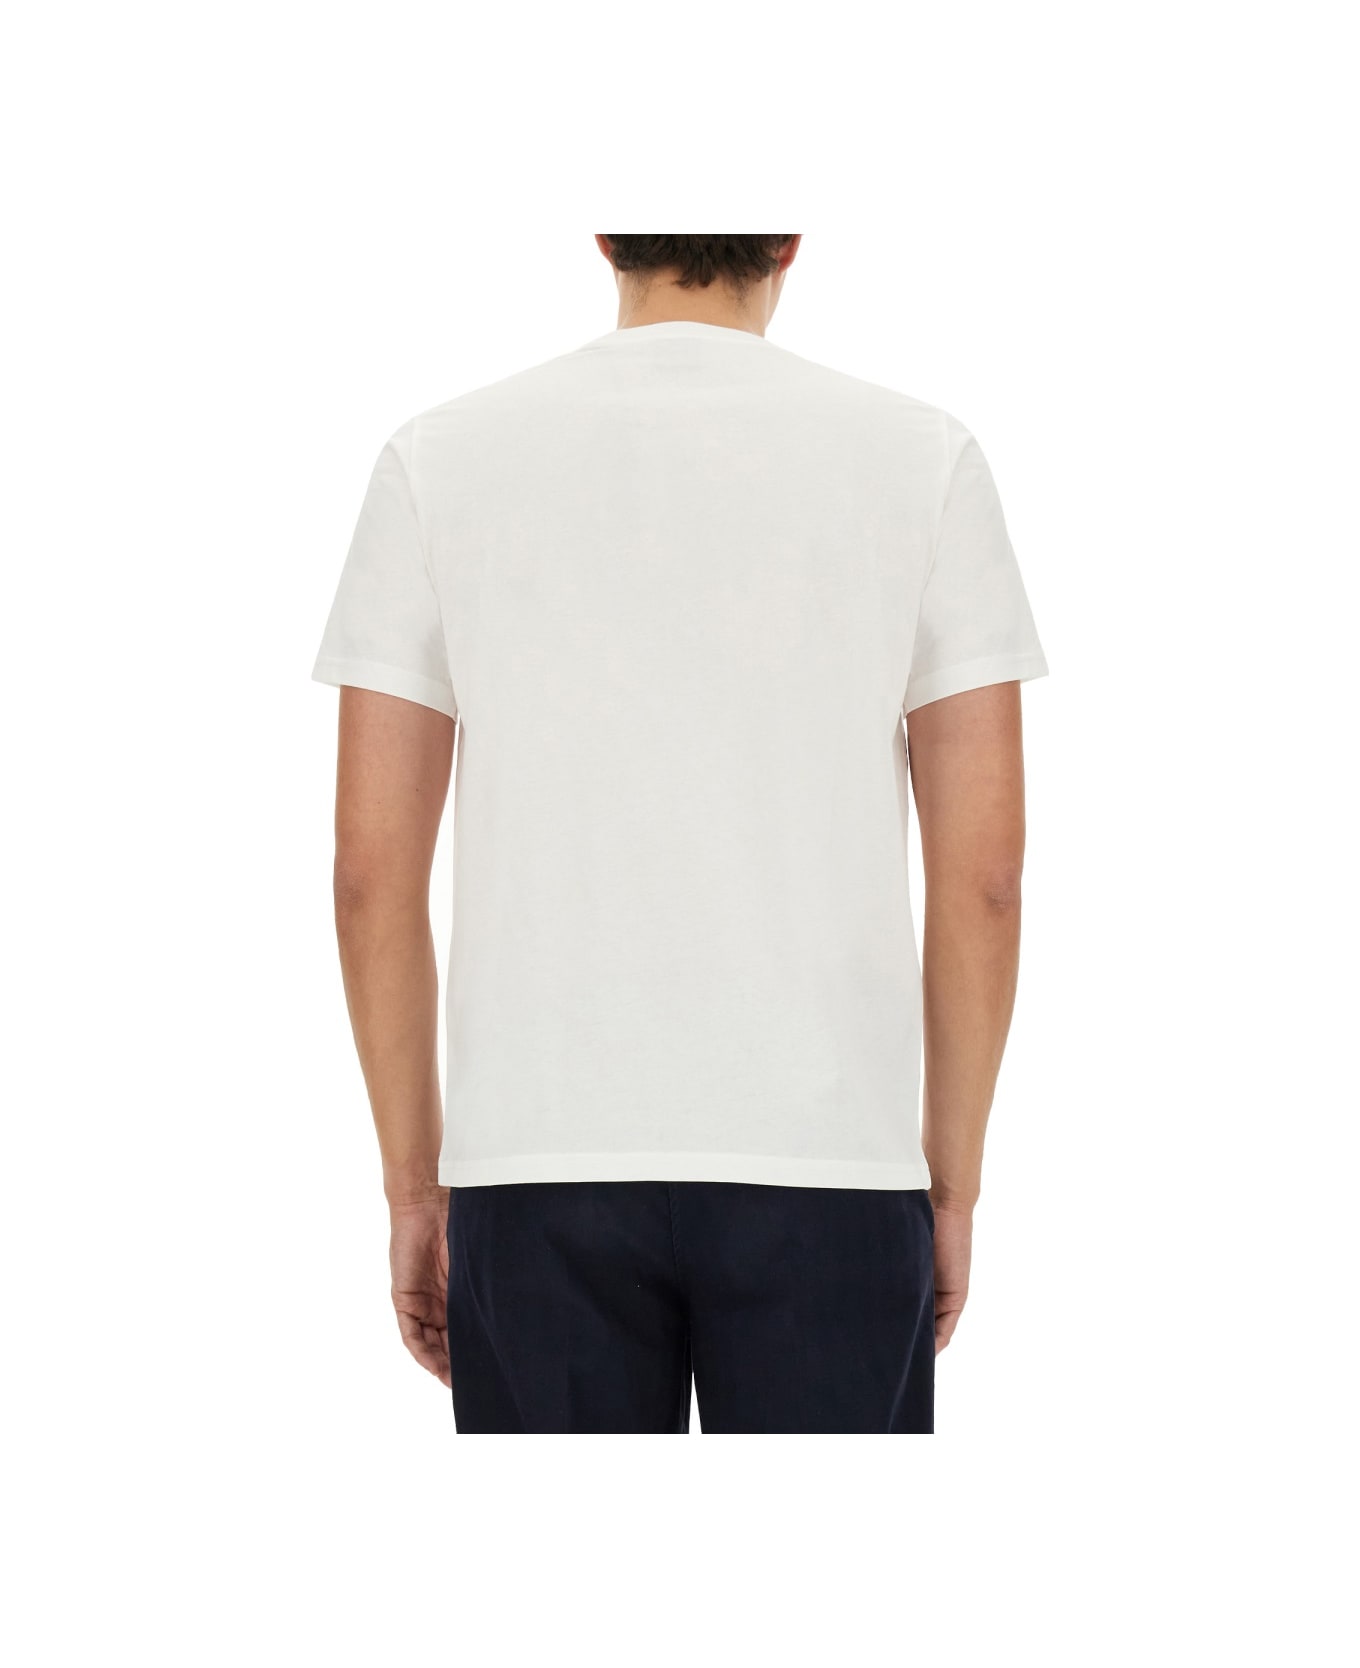 PS by Paul Smith Cyclist Print T-shirt - WHITE